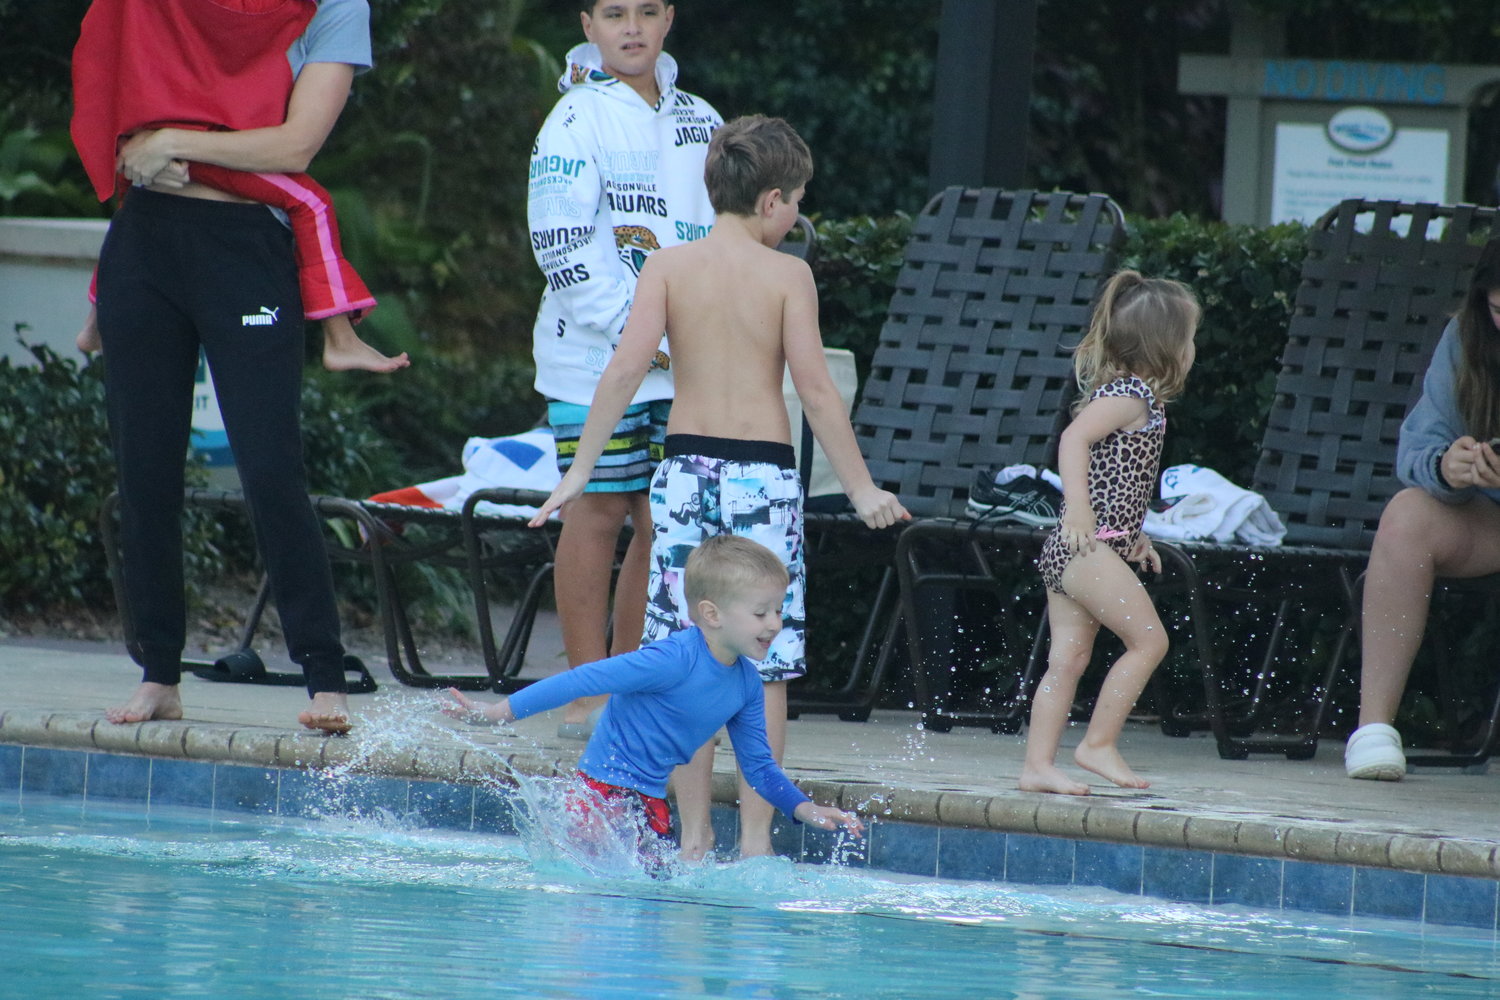 Some children could not wait to get in the water even before the official plunge.